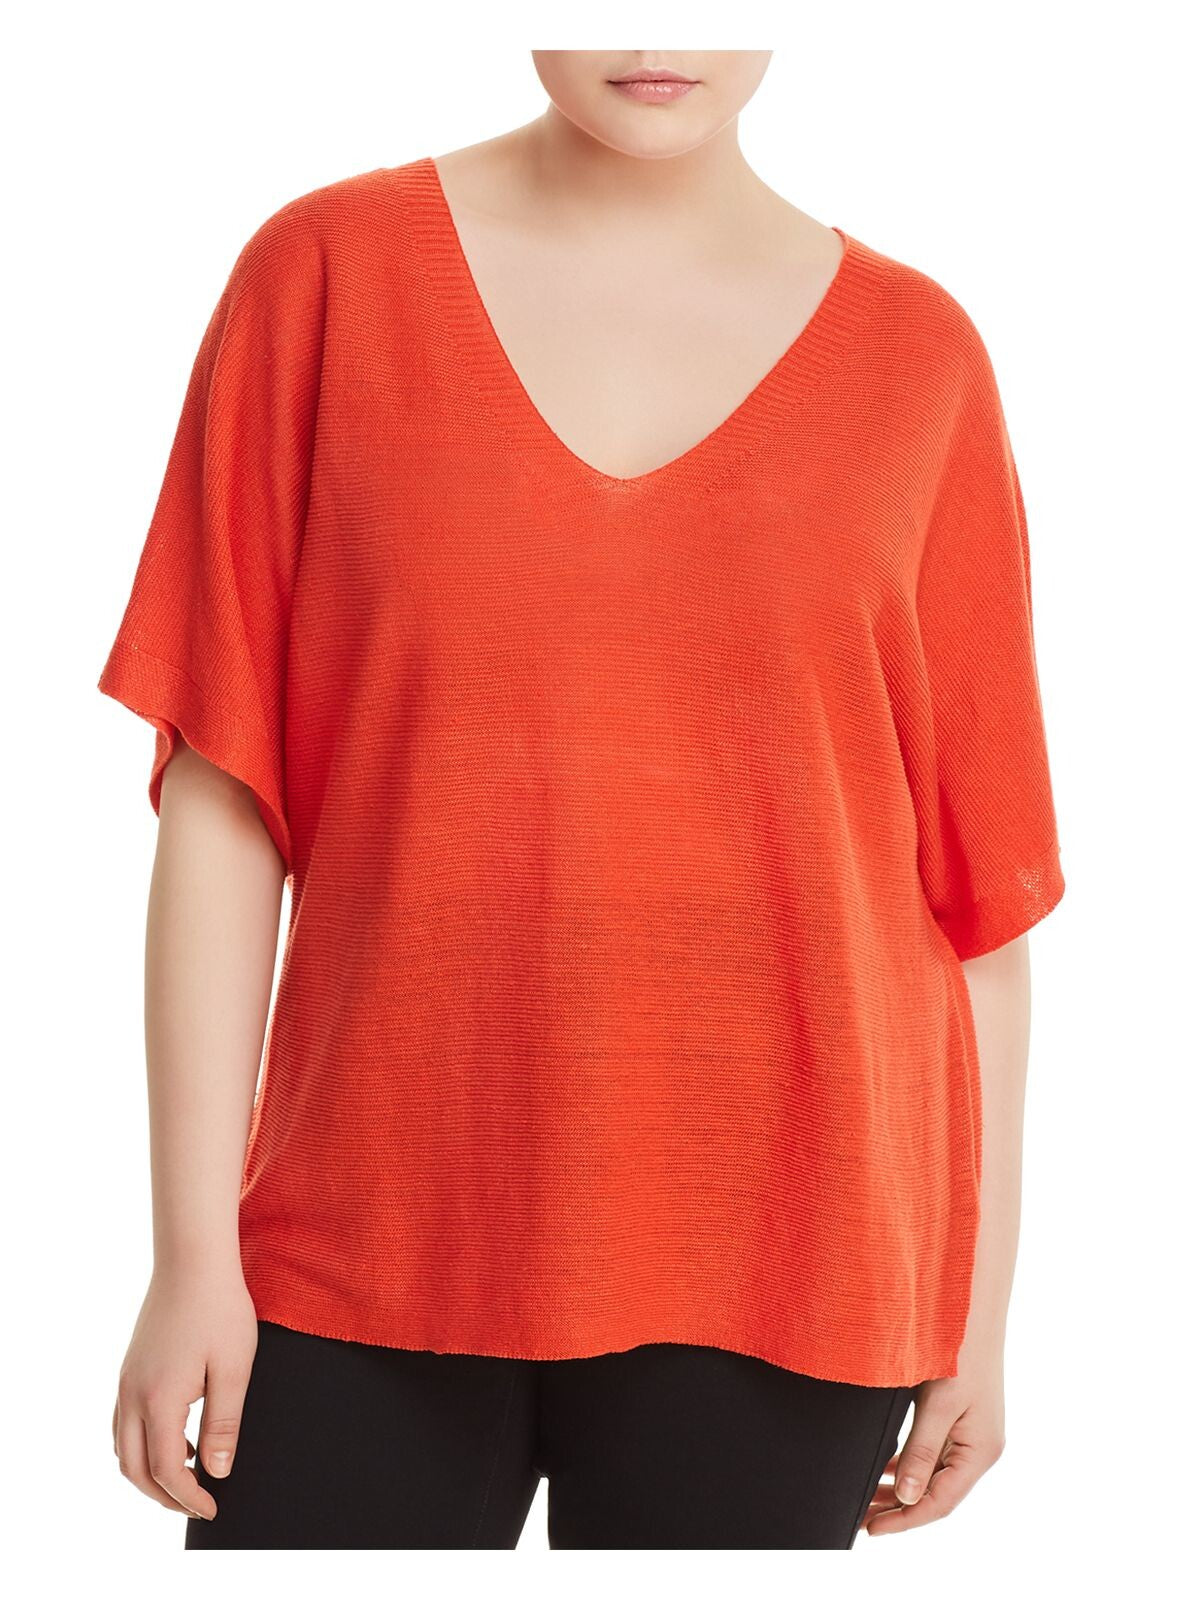 EILEEN FISHER Womens Orange Ribbed Low Cut Short Sleeve V Neck Sweater Plus 2X